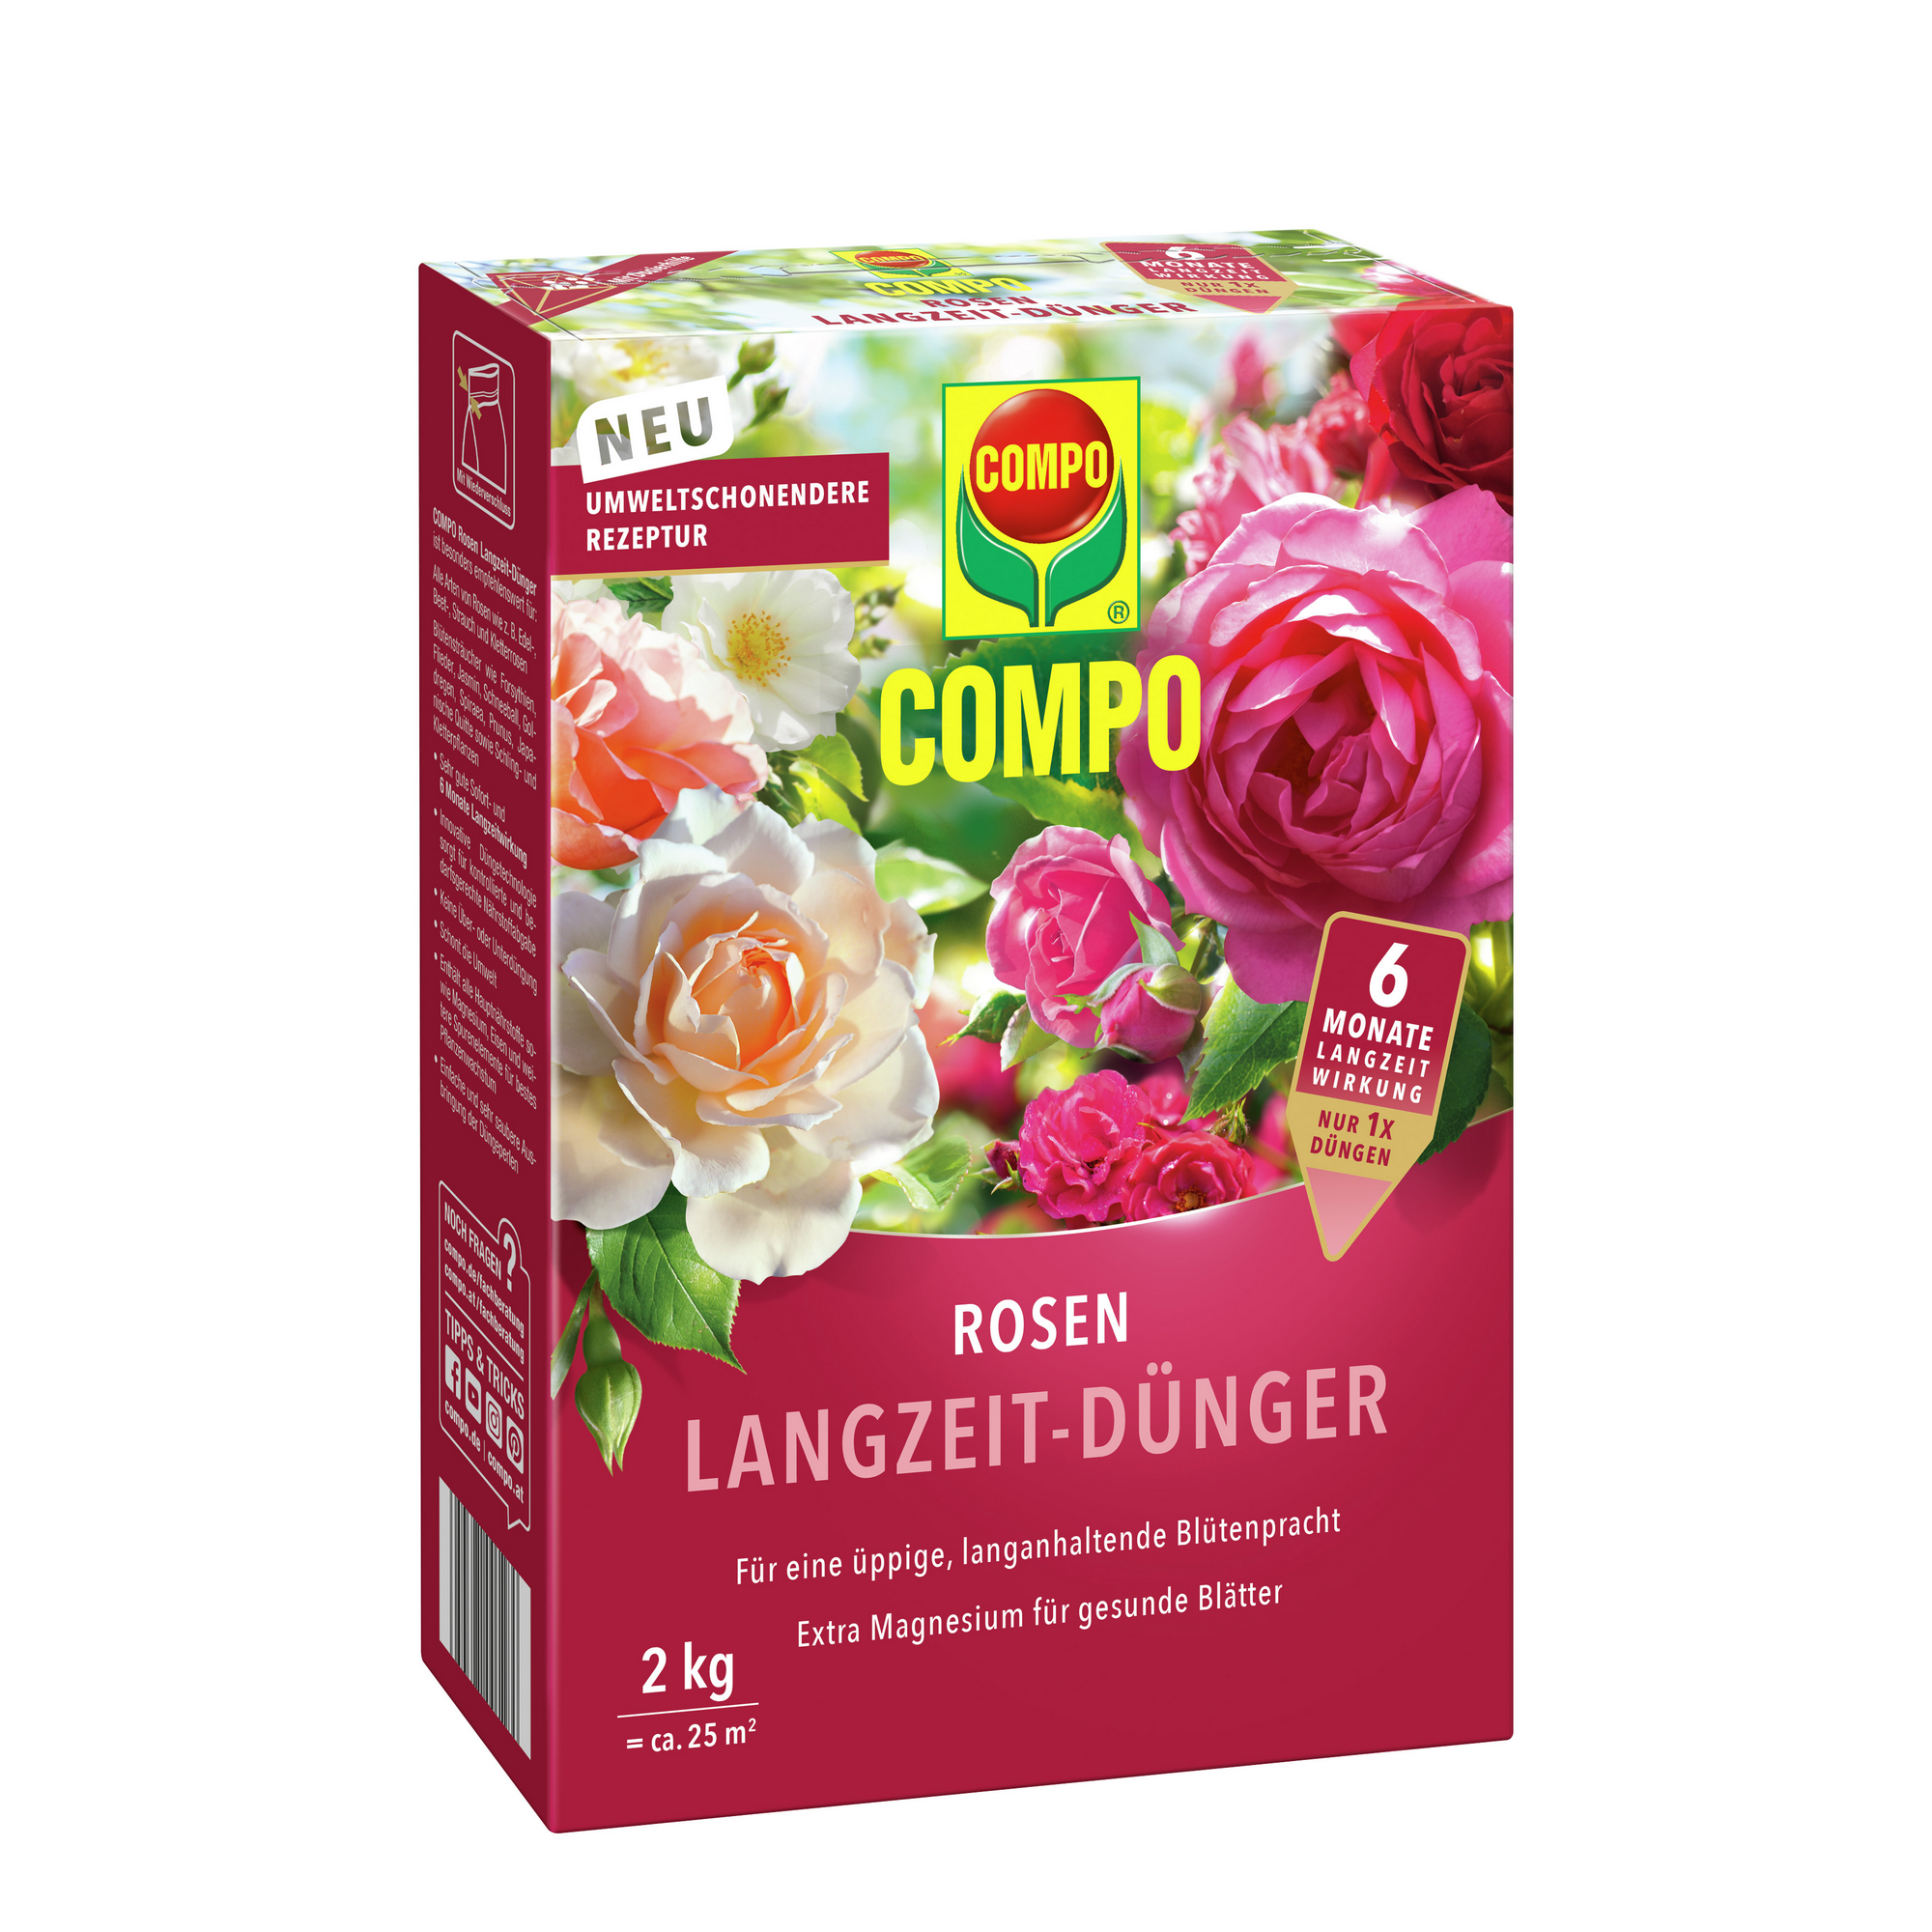 Rosen-Langzeitdünger 2 kg + product picture